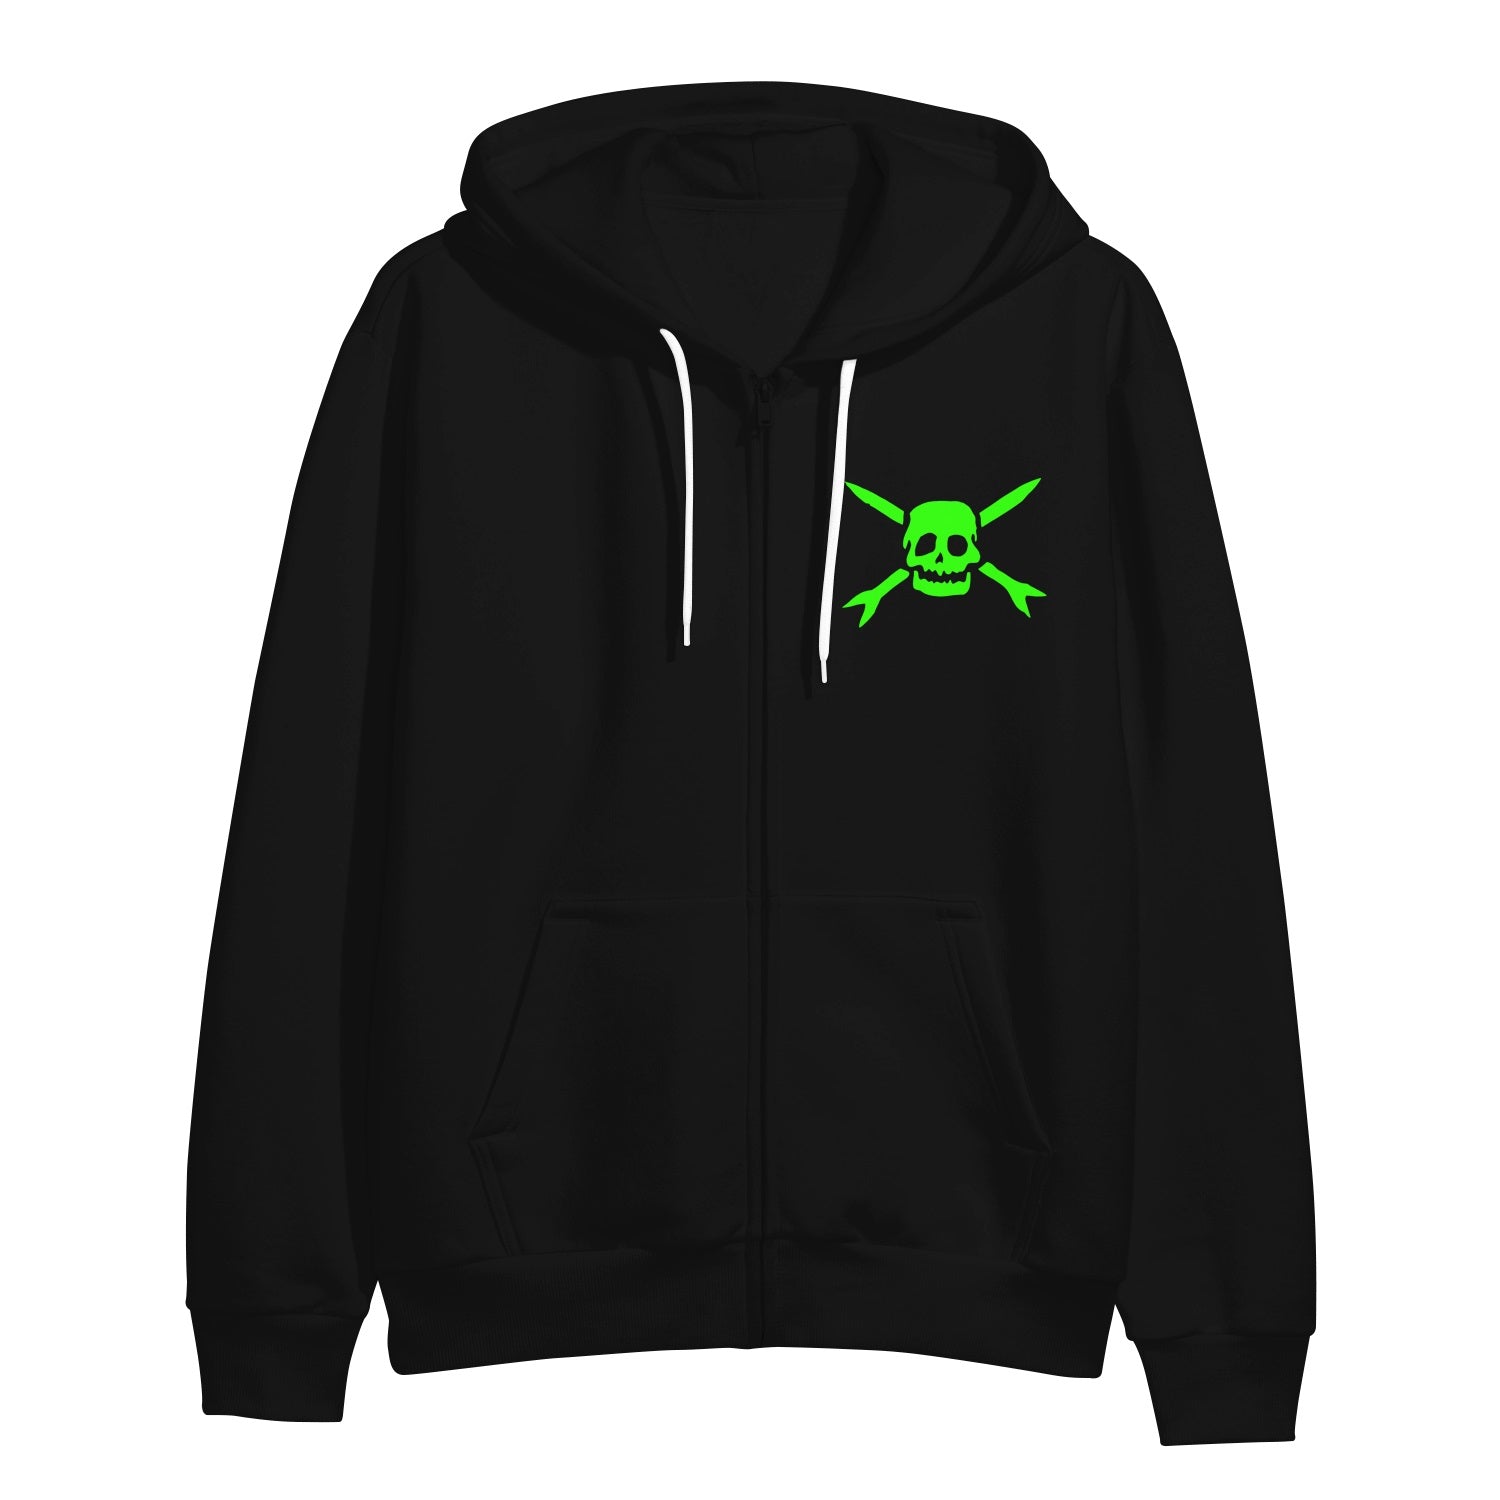 Image of the front of a black hooded sweatshirt against a white background. The front of the sweatshirt has white strings. The left chest has the teenage bottlerocket logo of a skull head with cross arrows. 